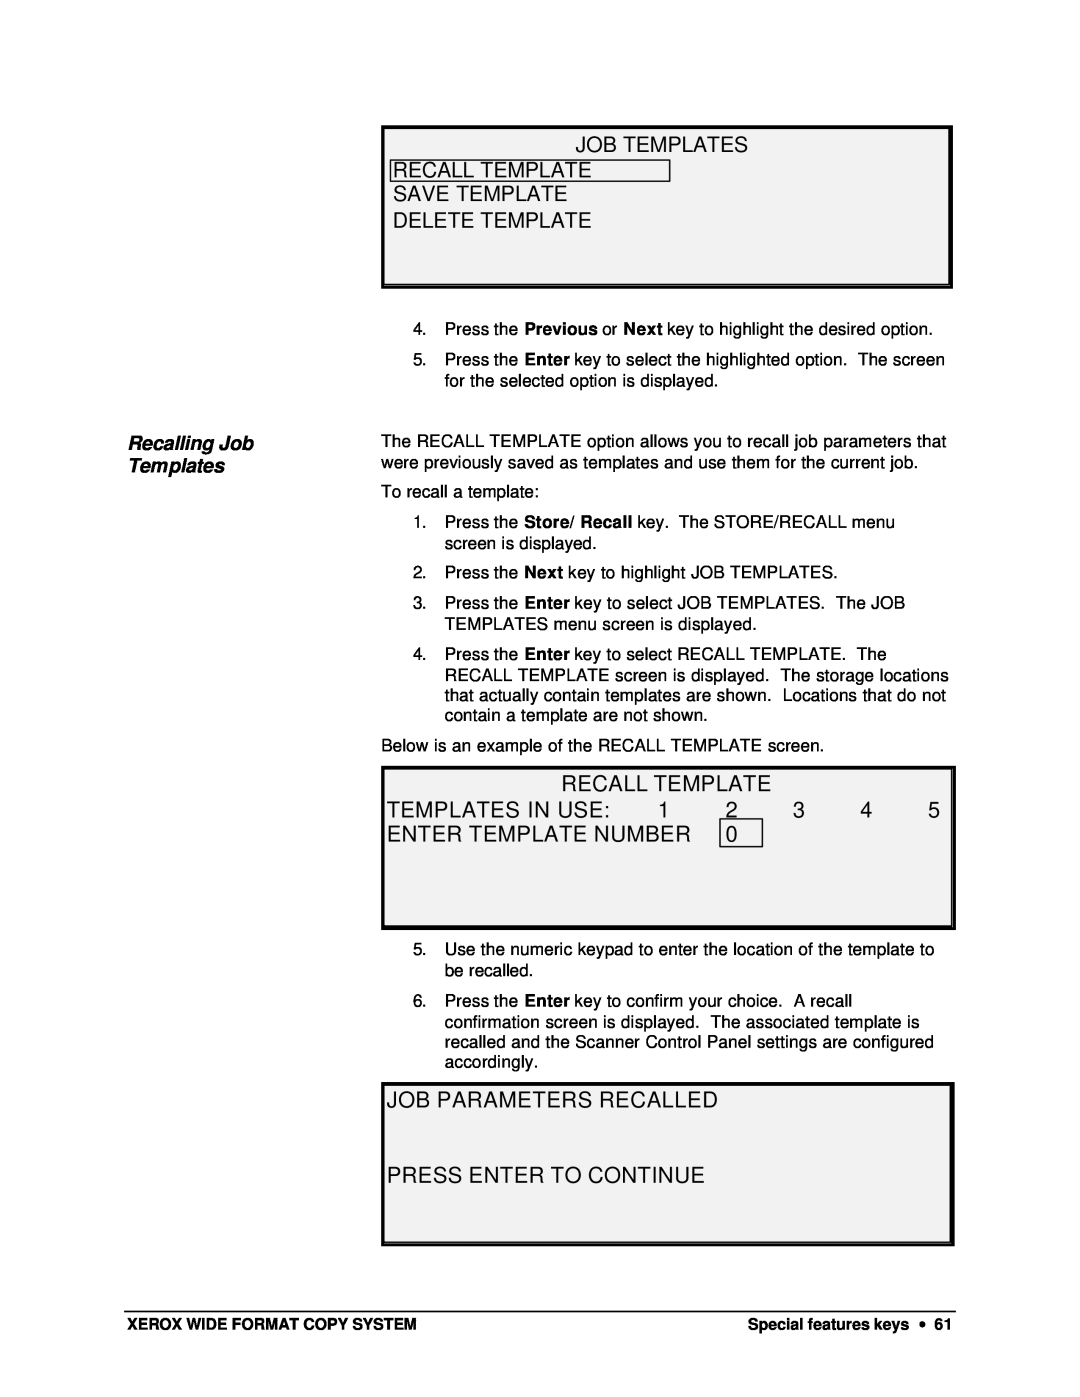 Xerox X2, 8825 Recall Template, Templates In Use, Enter Template Number, Job Parameters Recalled Press Enter To Continue 